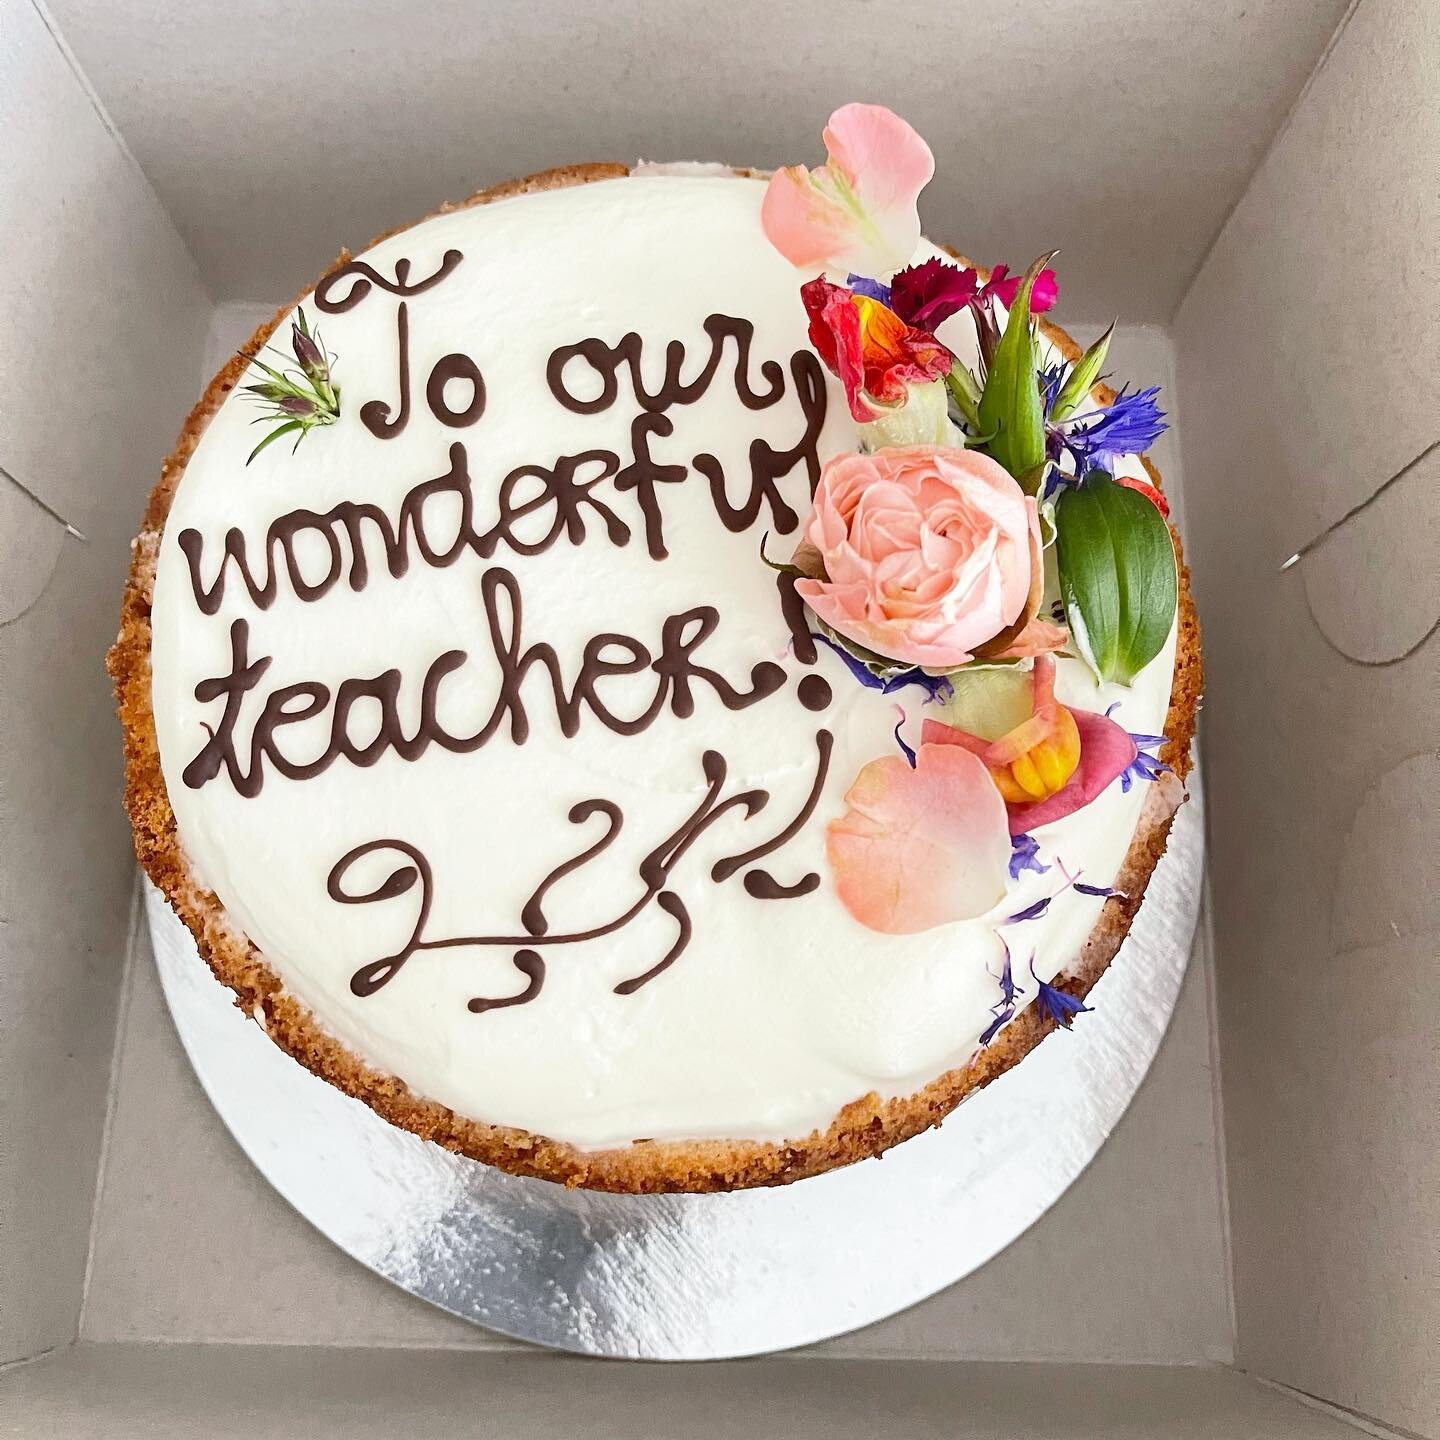 &ldquo;A teacher can inspire hope, ignite the imagination, and instill a love of learning.&rdquo;- B.H. Love
🌱
Thank you Tinker teachers for all of your hard work and dedication. You are truly appreciated! 
🌱
Thank you to our wonderful PTA for putt